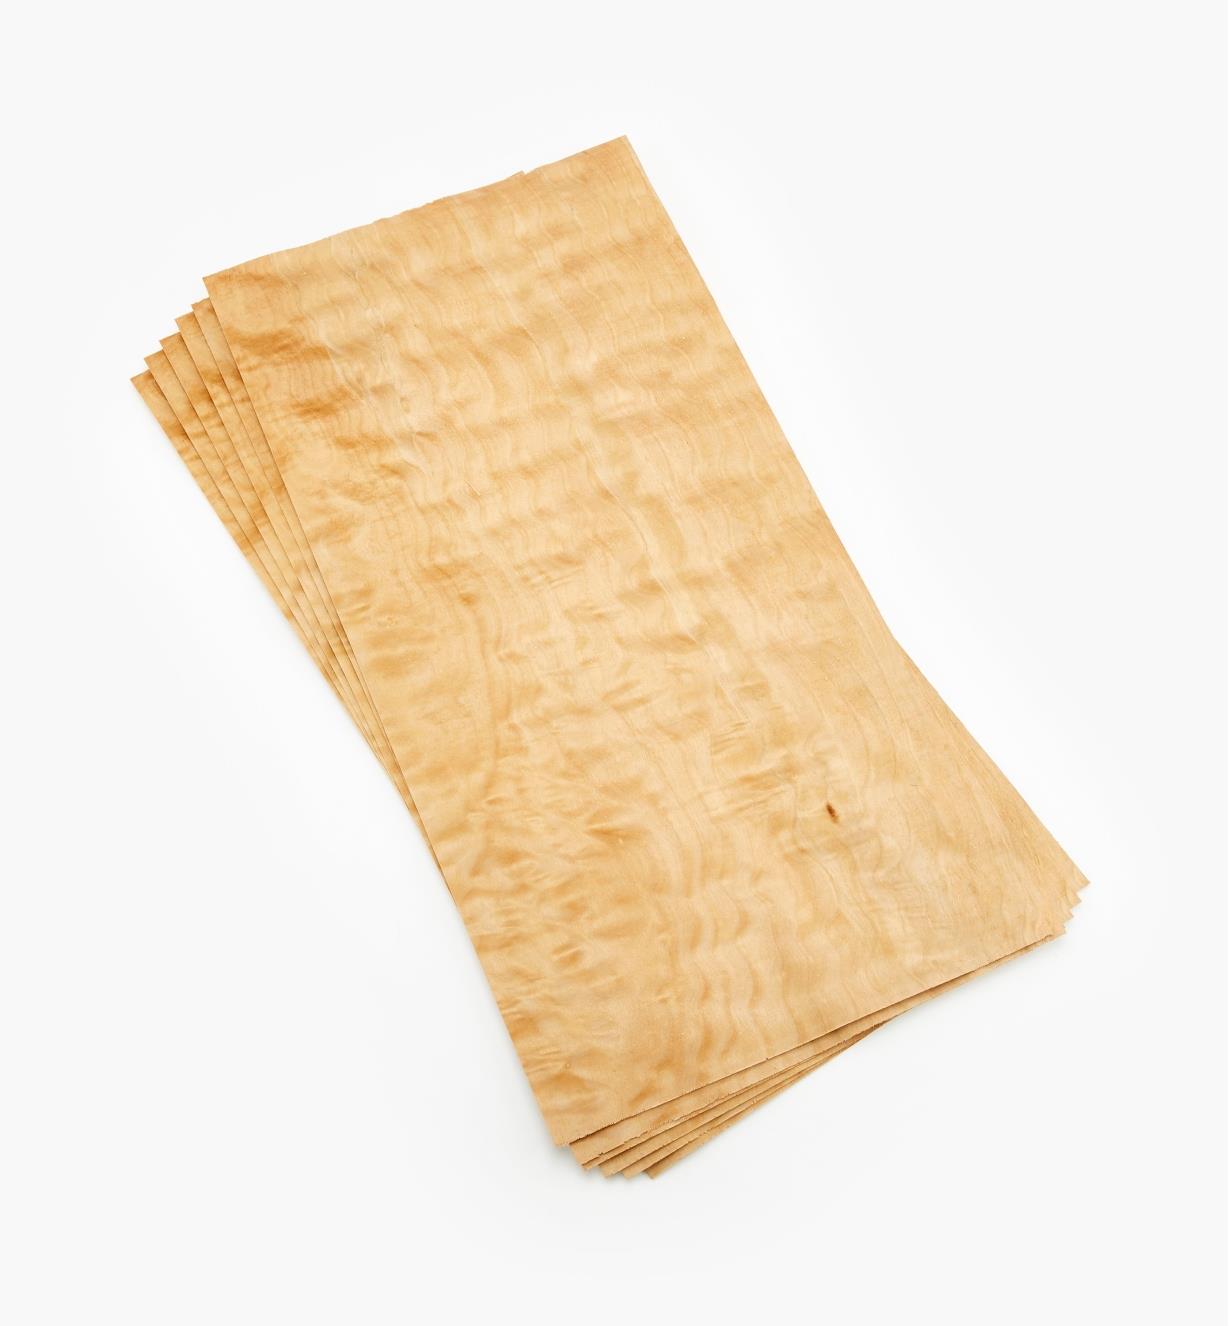 55K6454 - Quilted Maple, 8 sq.ft.